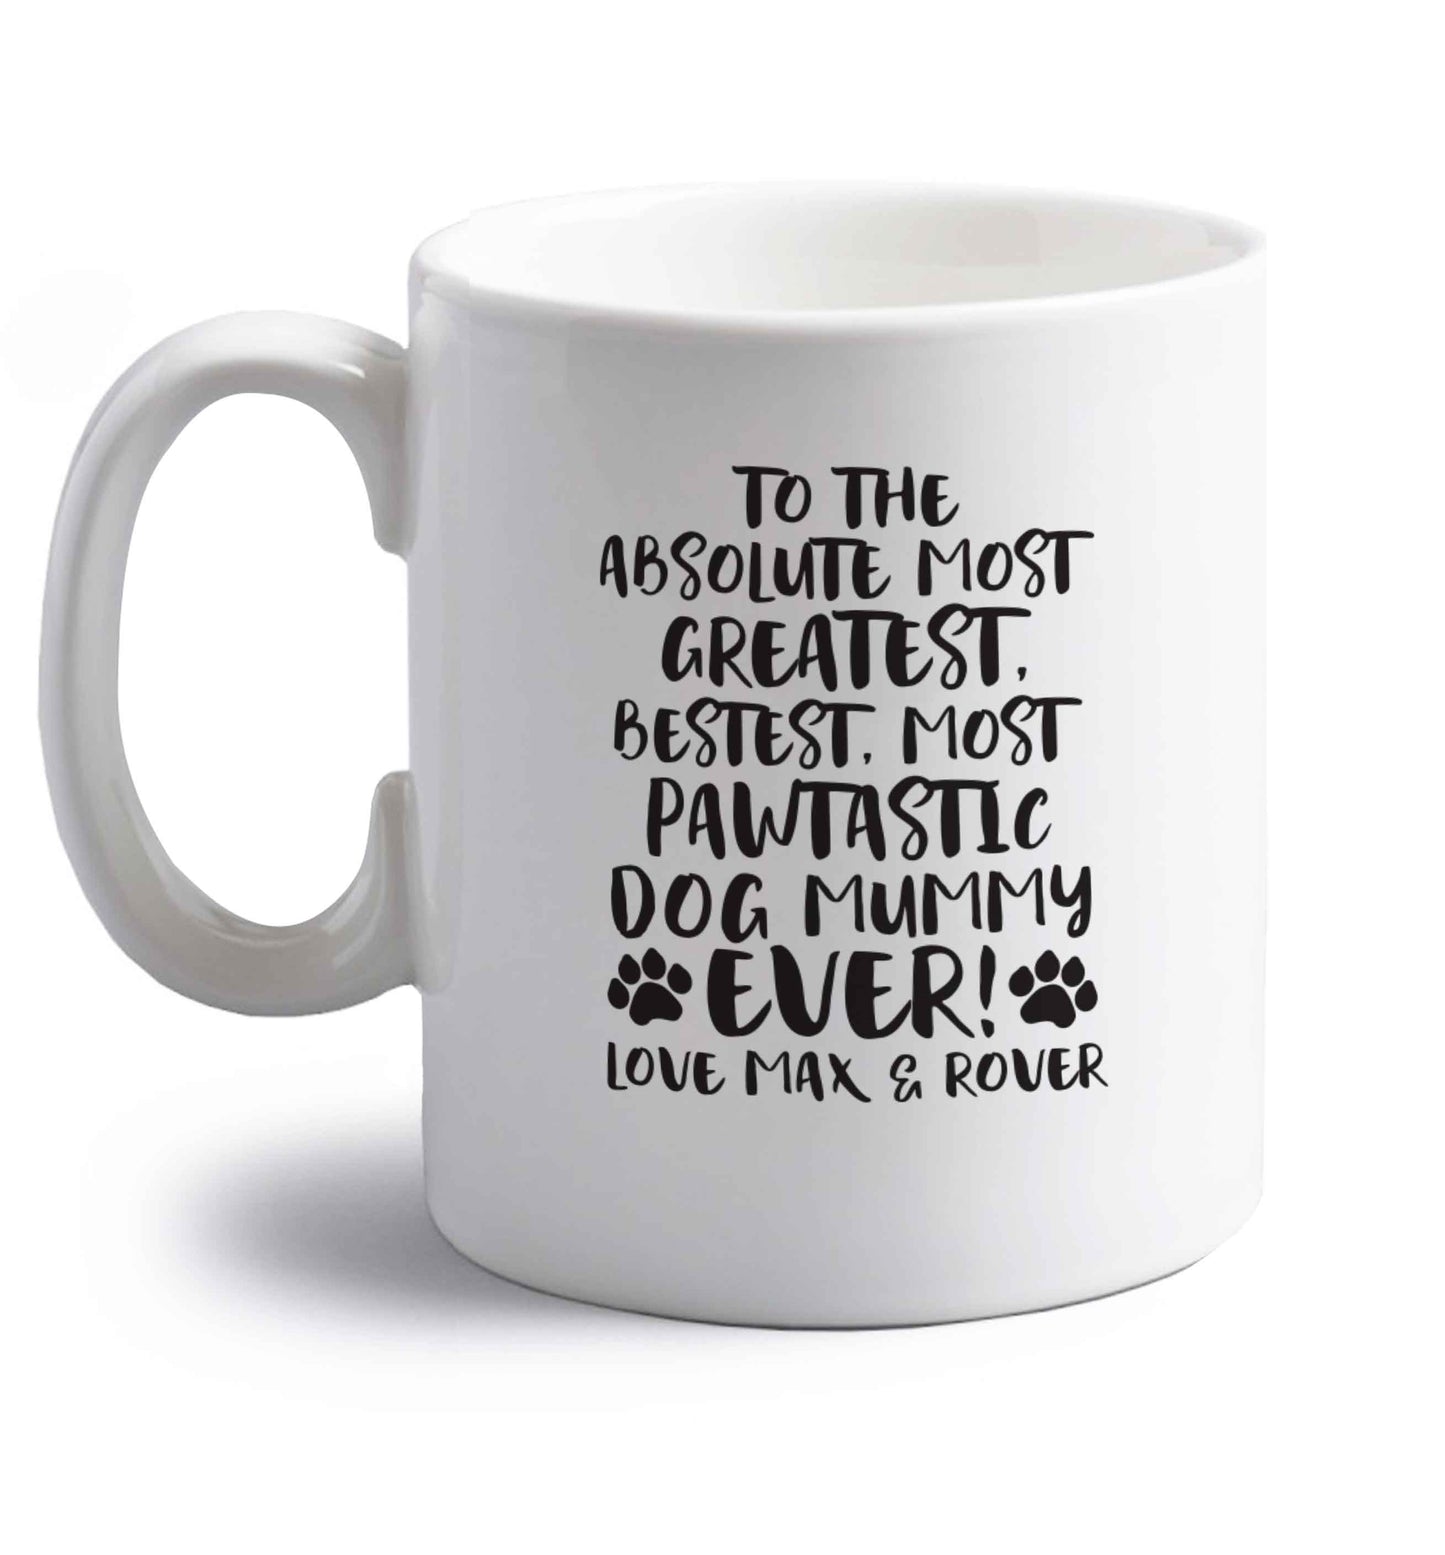 Personalsied to the most pawtastic dog mummy ever right handed white ceramic mug 